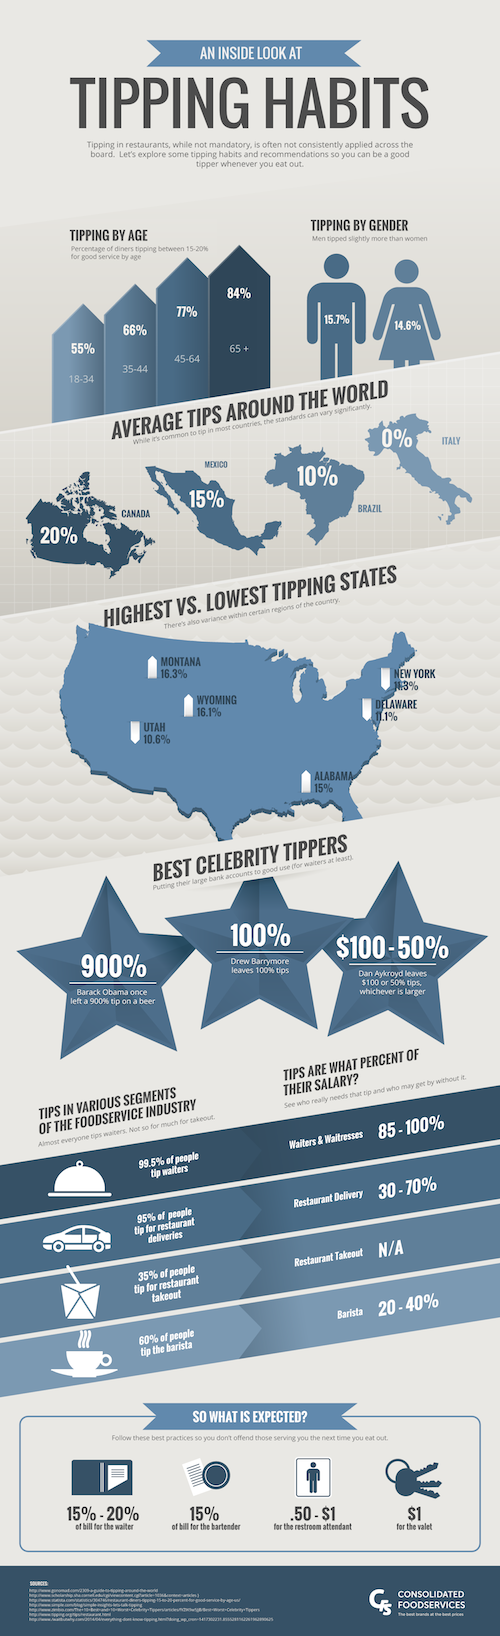 Restaurant Tipping - infographic